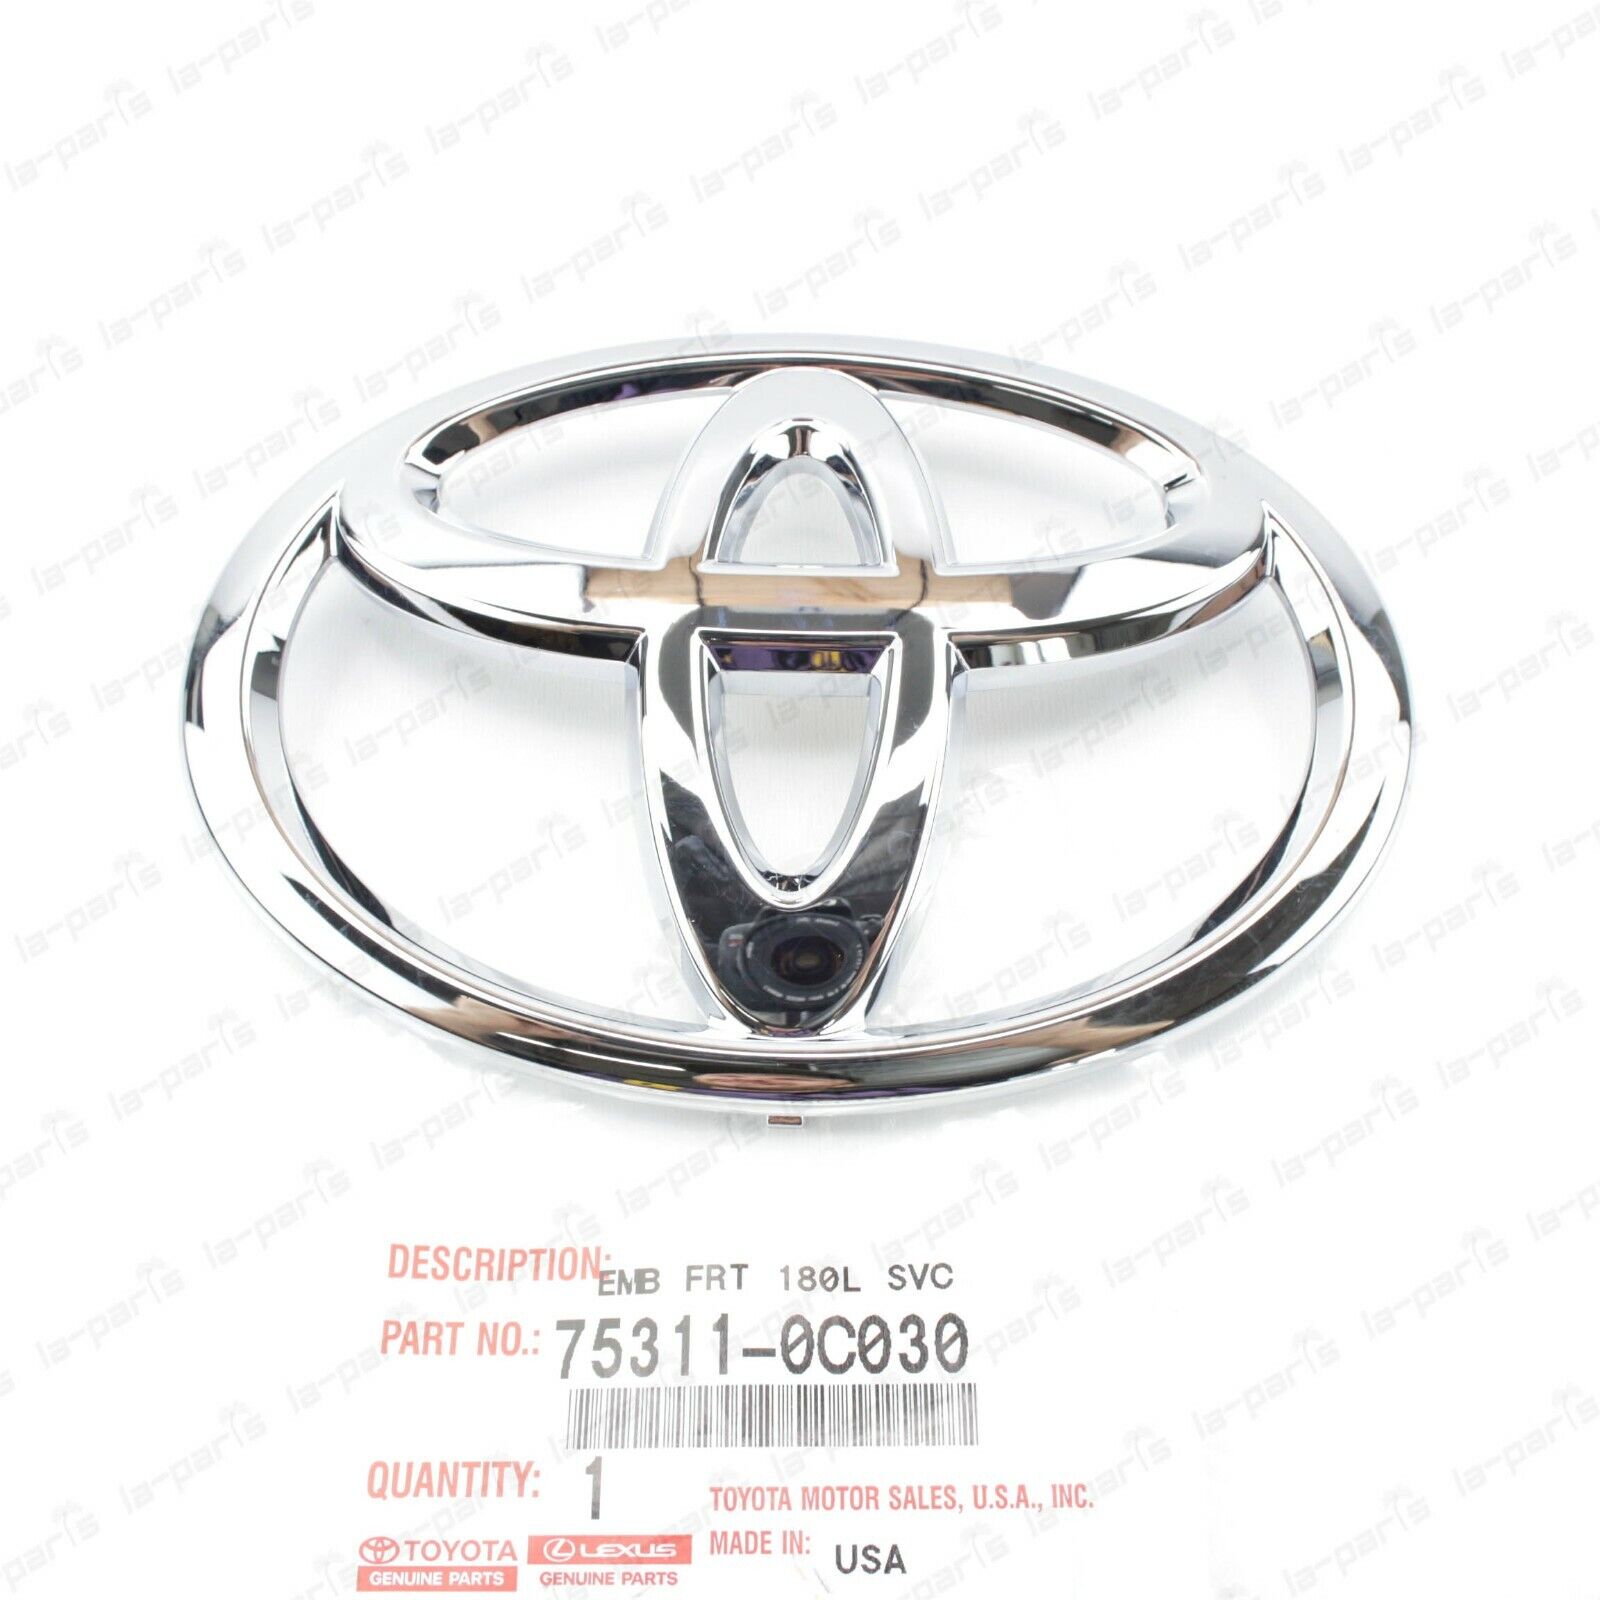 NEW GENUINE TOYOTA TUNDRA  SEQUOIA CHROME FRONT GRILLE EMBLEM 75311-0C030